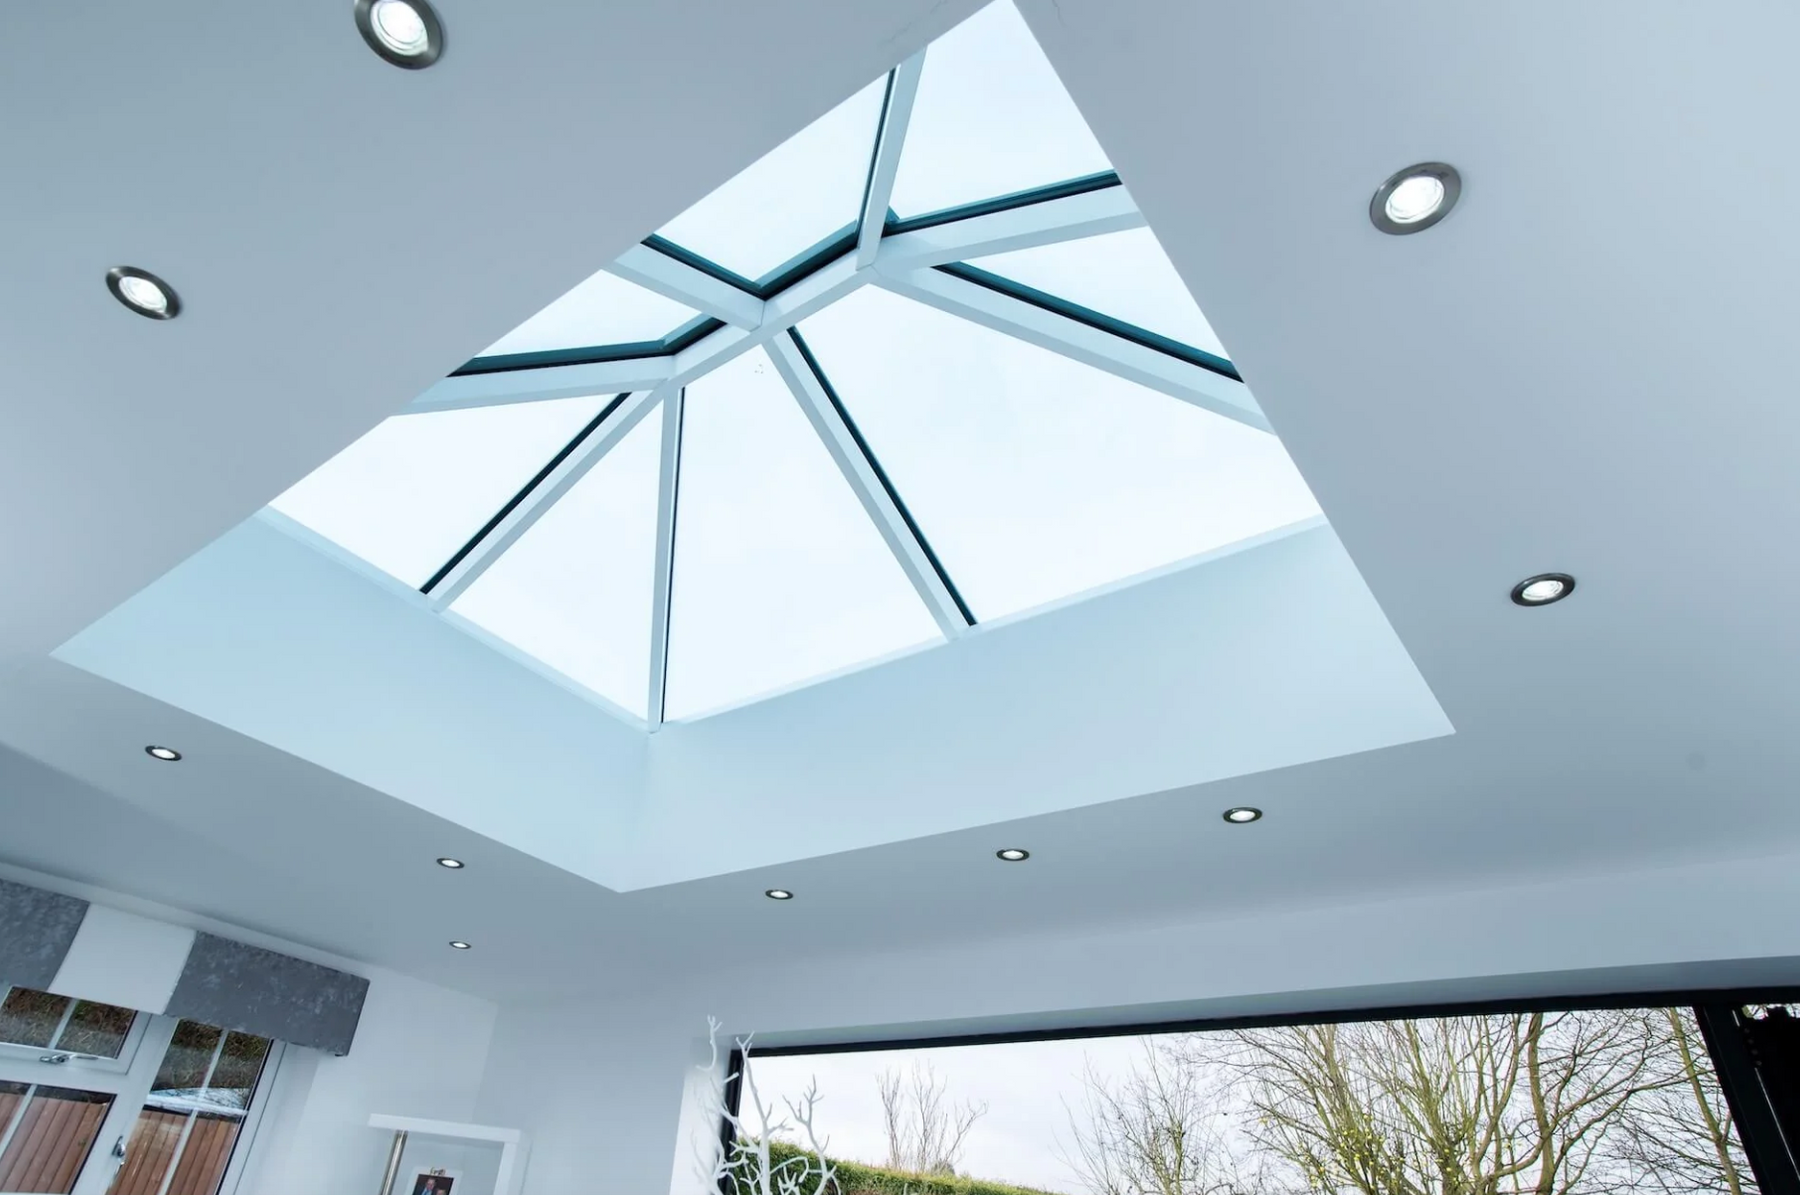 3 Things to Consider When Installing Skylights on Vaulted Ceilings